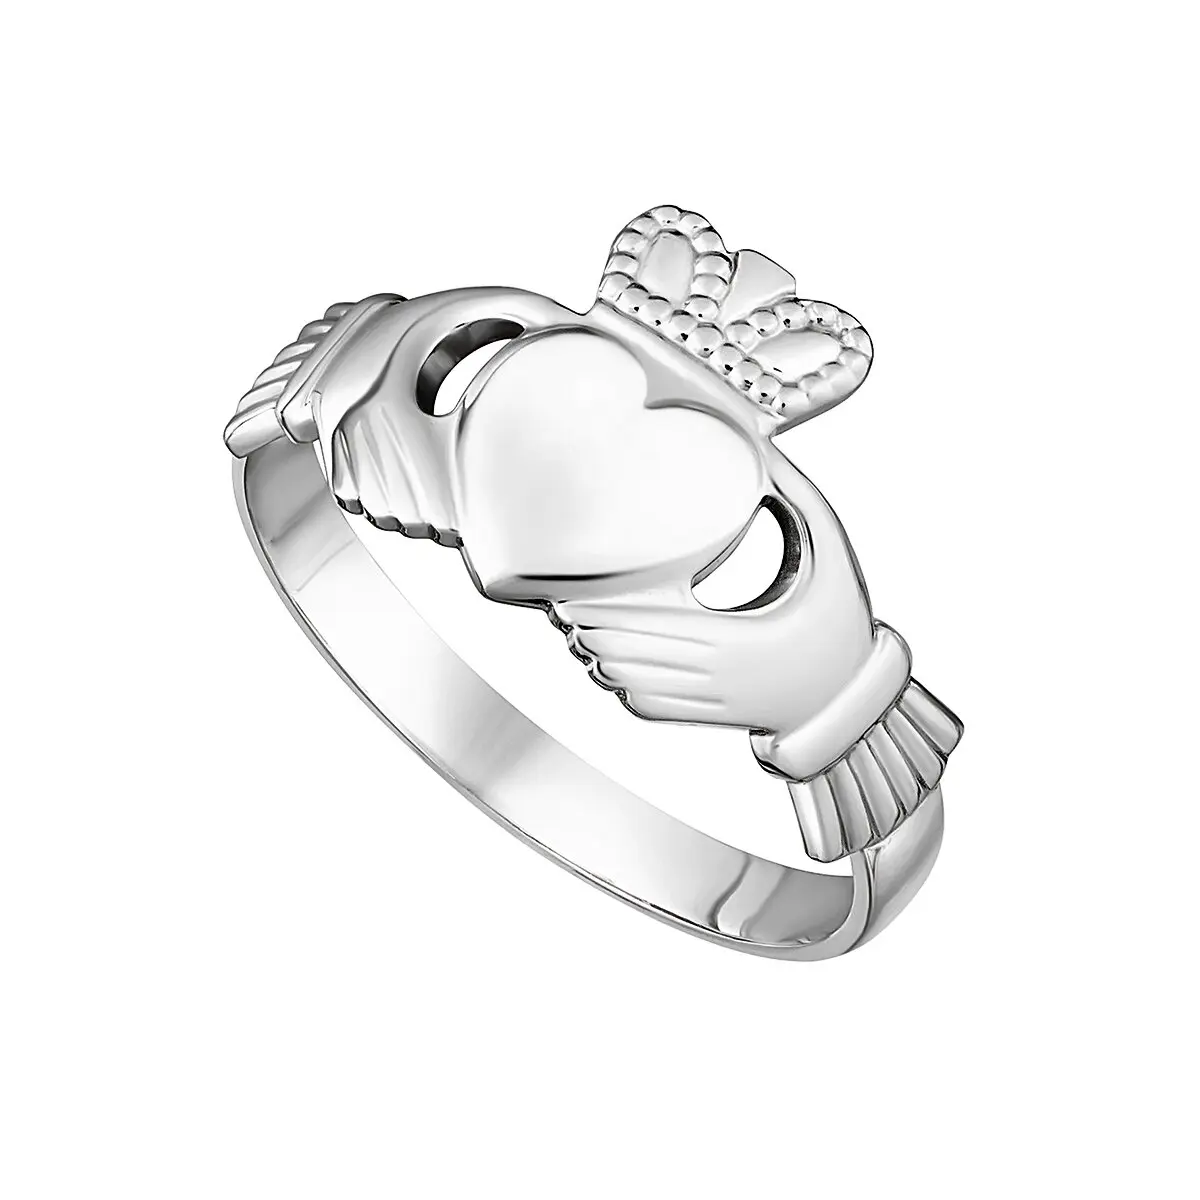 Ijc Ladies White Gold Claddagh Ring...